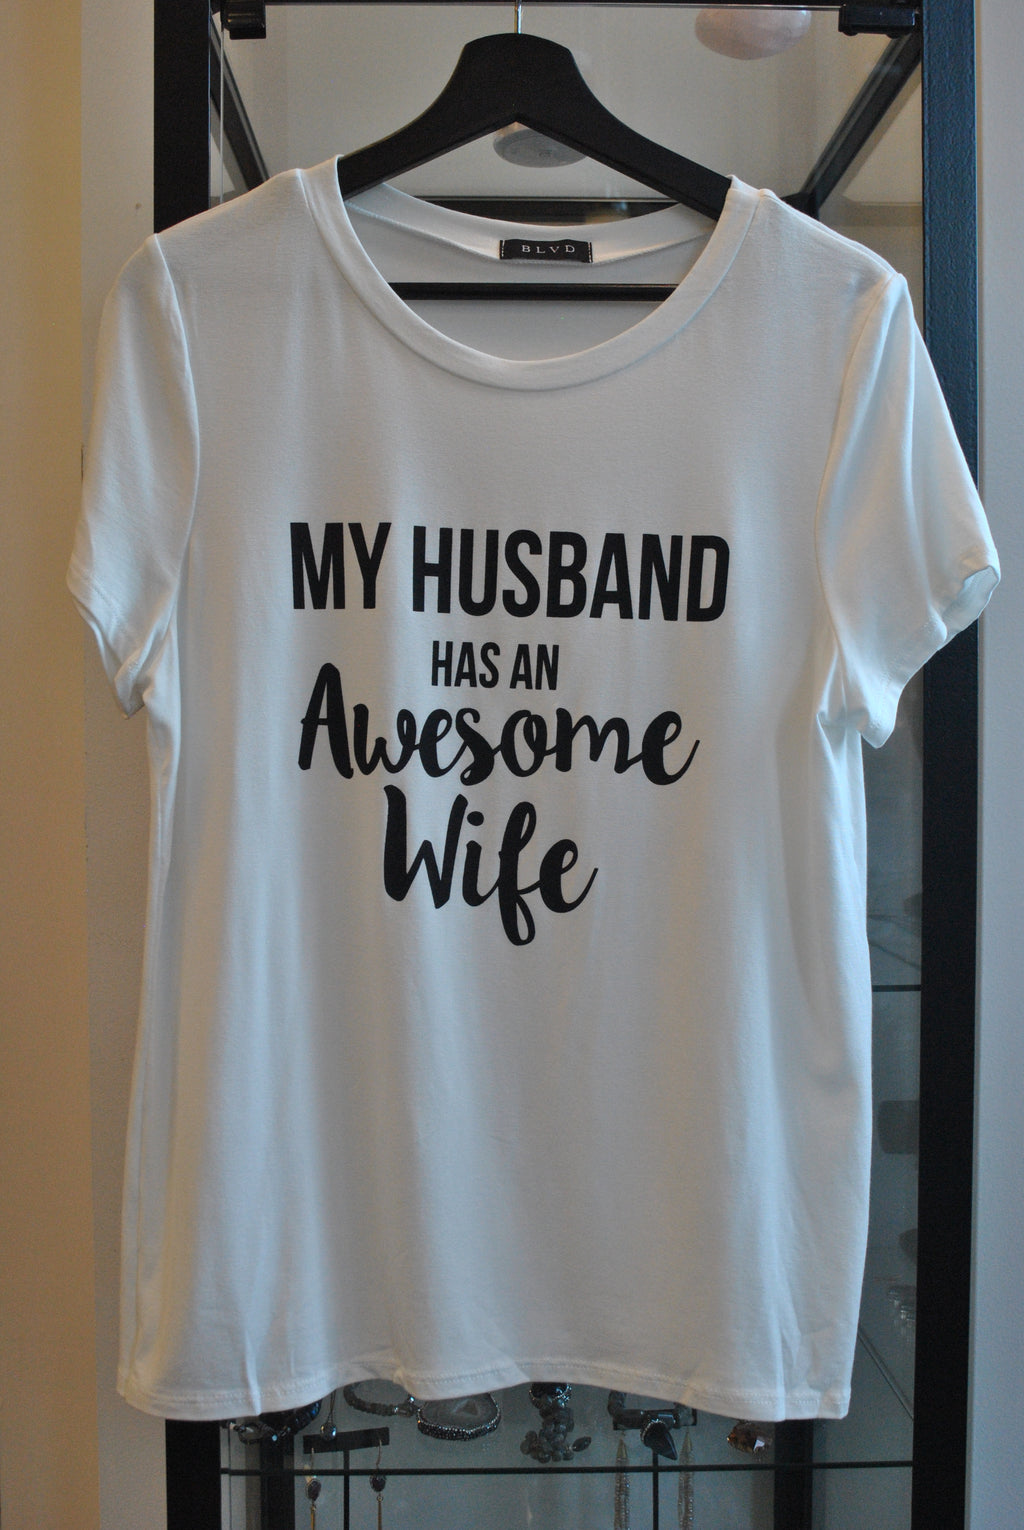 GRAPHIC T-SHIRT - "MY HUSBAND HAS AN AWESOME WIFE" - WHITE